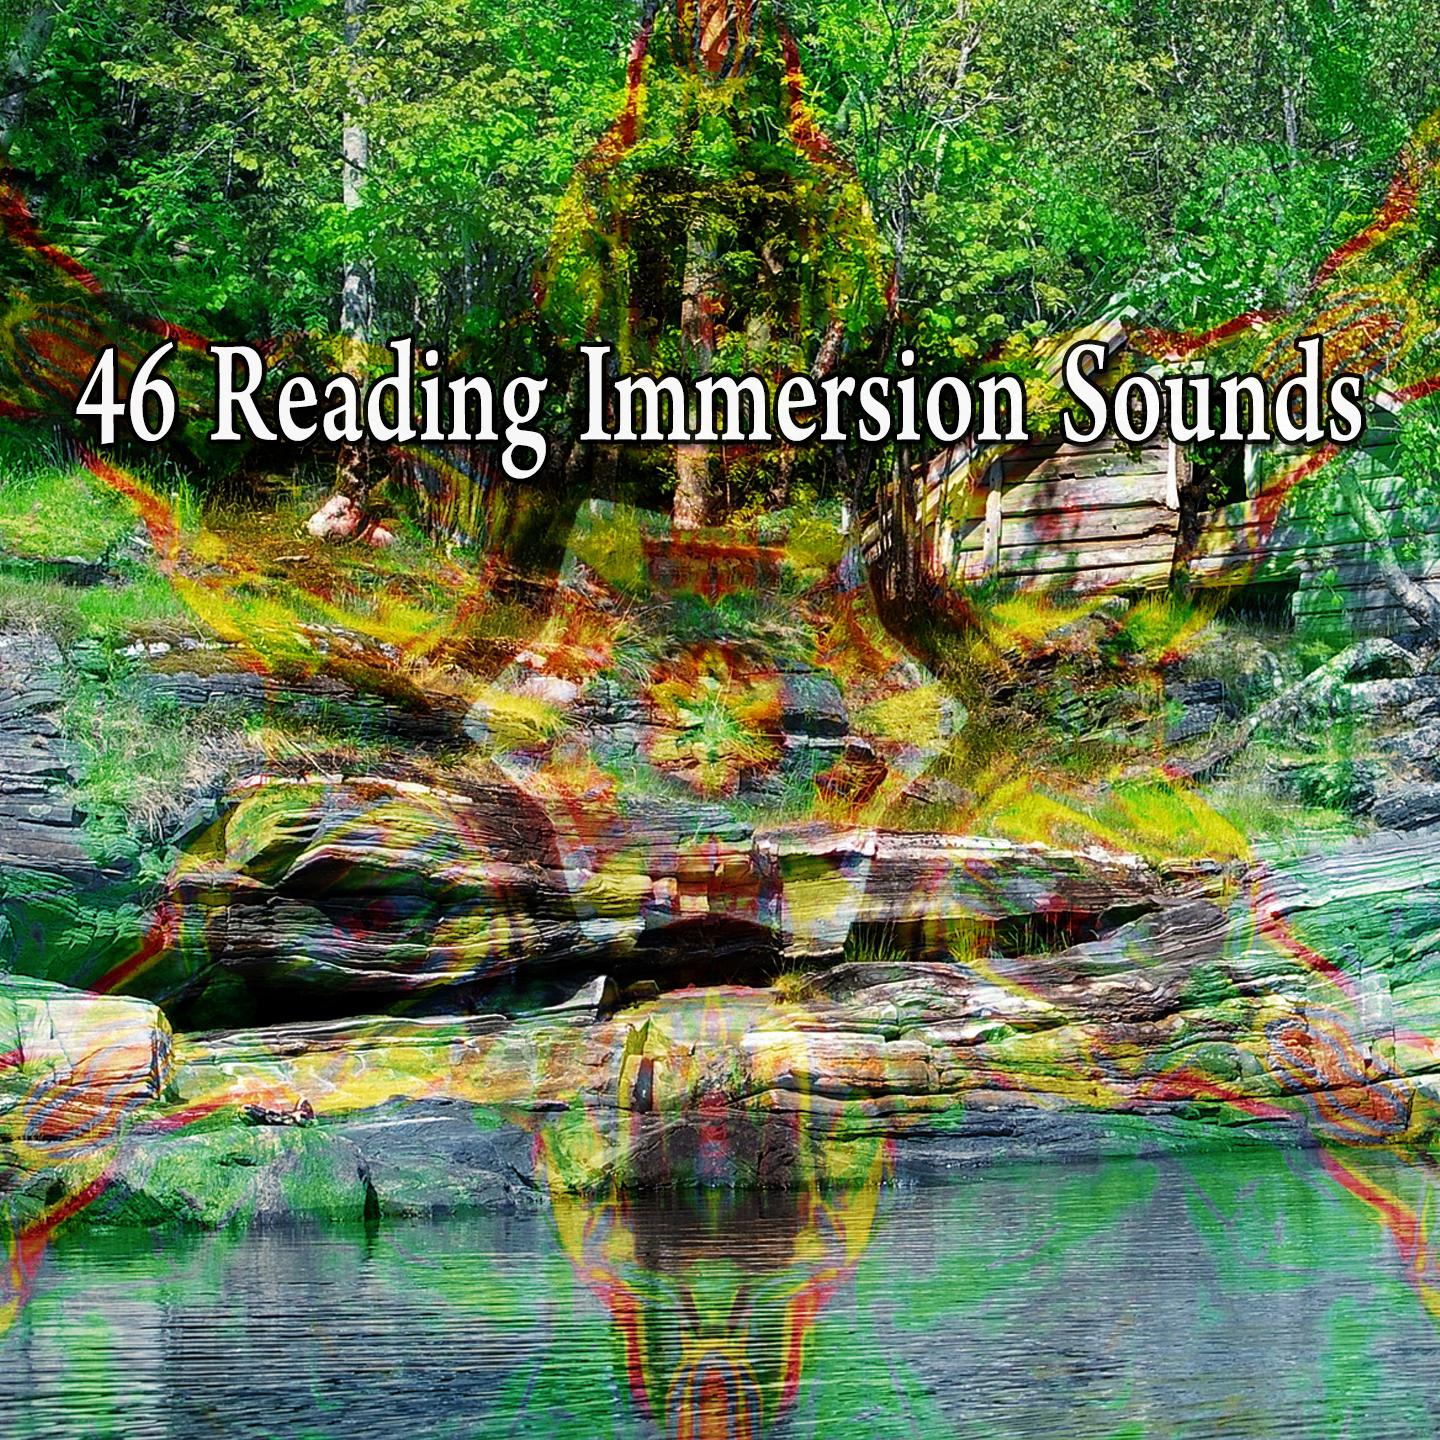 46 Reading Immersion Sounds